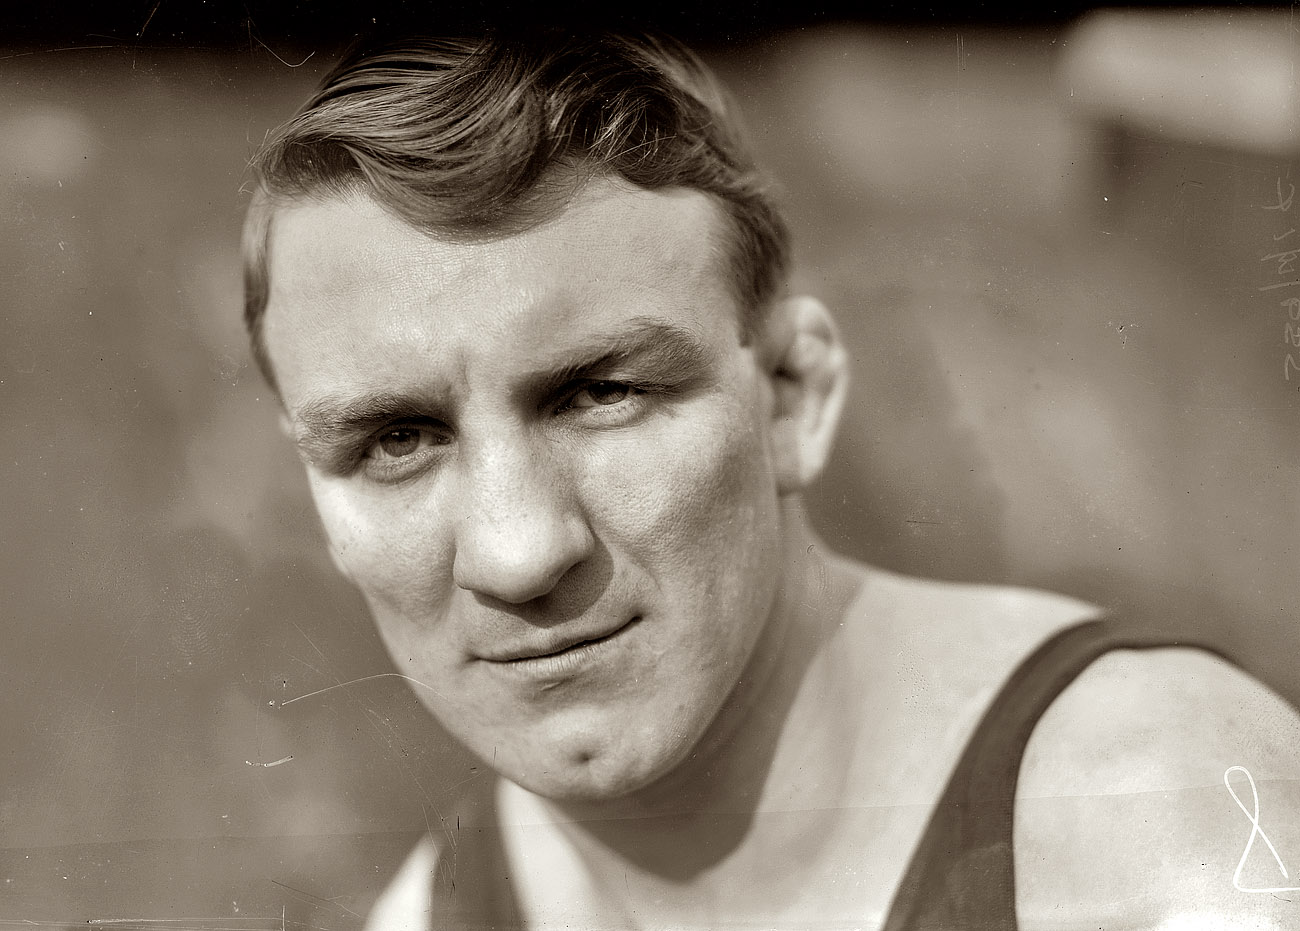 September 1914. The boxer Fred Welsh in New York. Note the cauliflower ear. View full size. 5x7 glass negative, George Grantham Bain Collection.